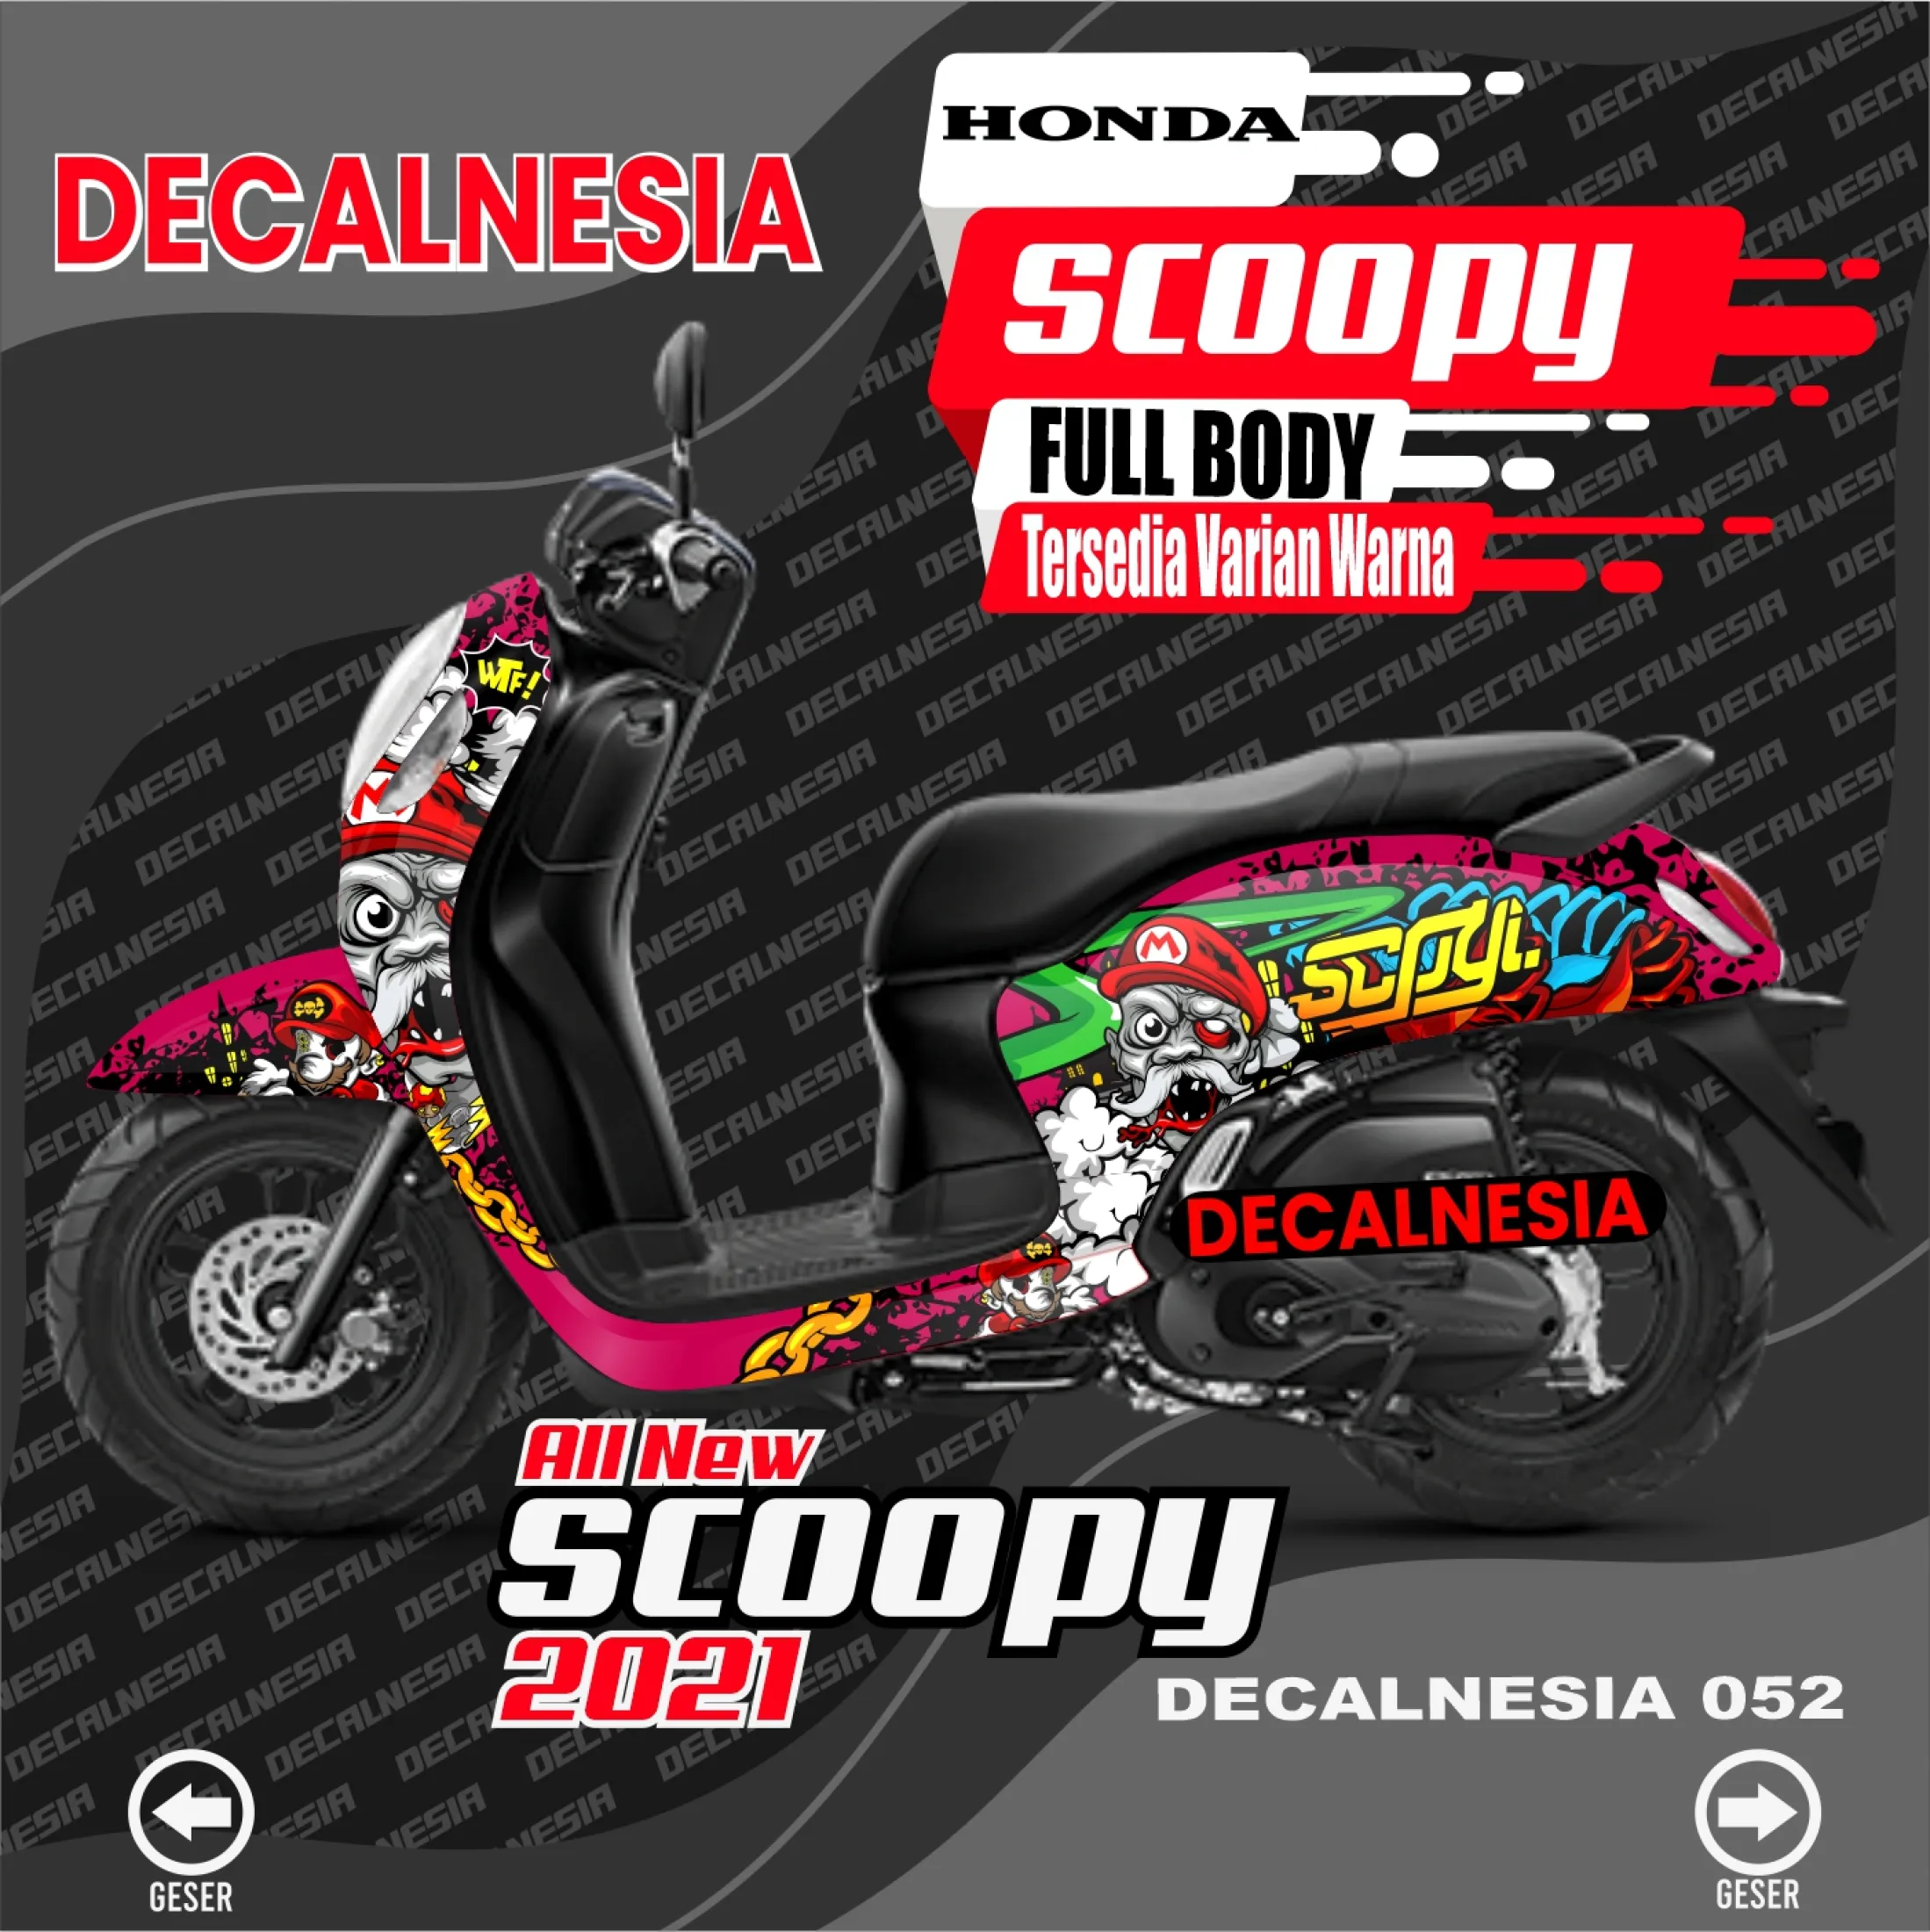 Decal Full Body Scoopy New 2021 Roadrace Variasi Stiker Motor Honda Scoopy Sticker Scoopy 2021 Stiker Scopy Decal Scopy 2021 Lazada Indonesia